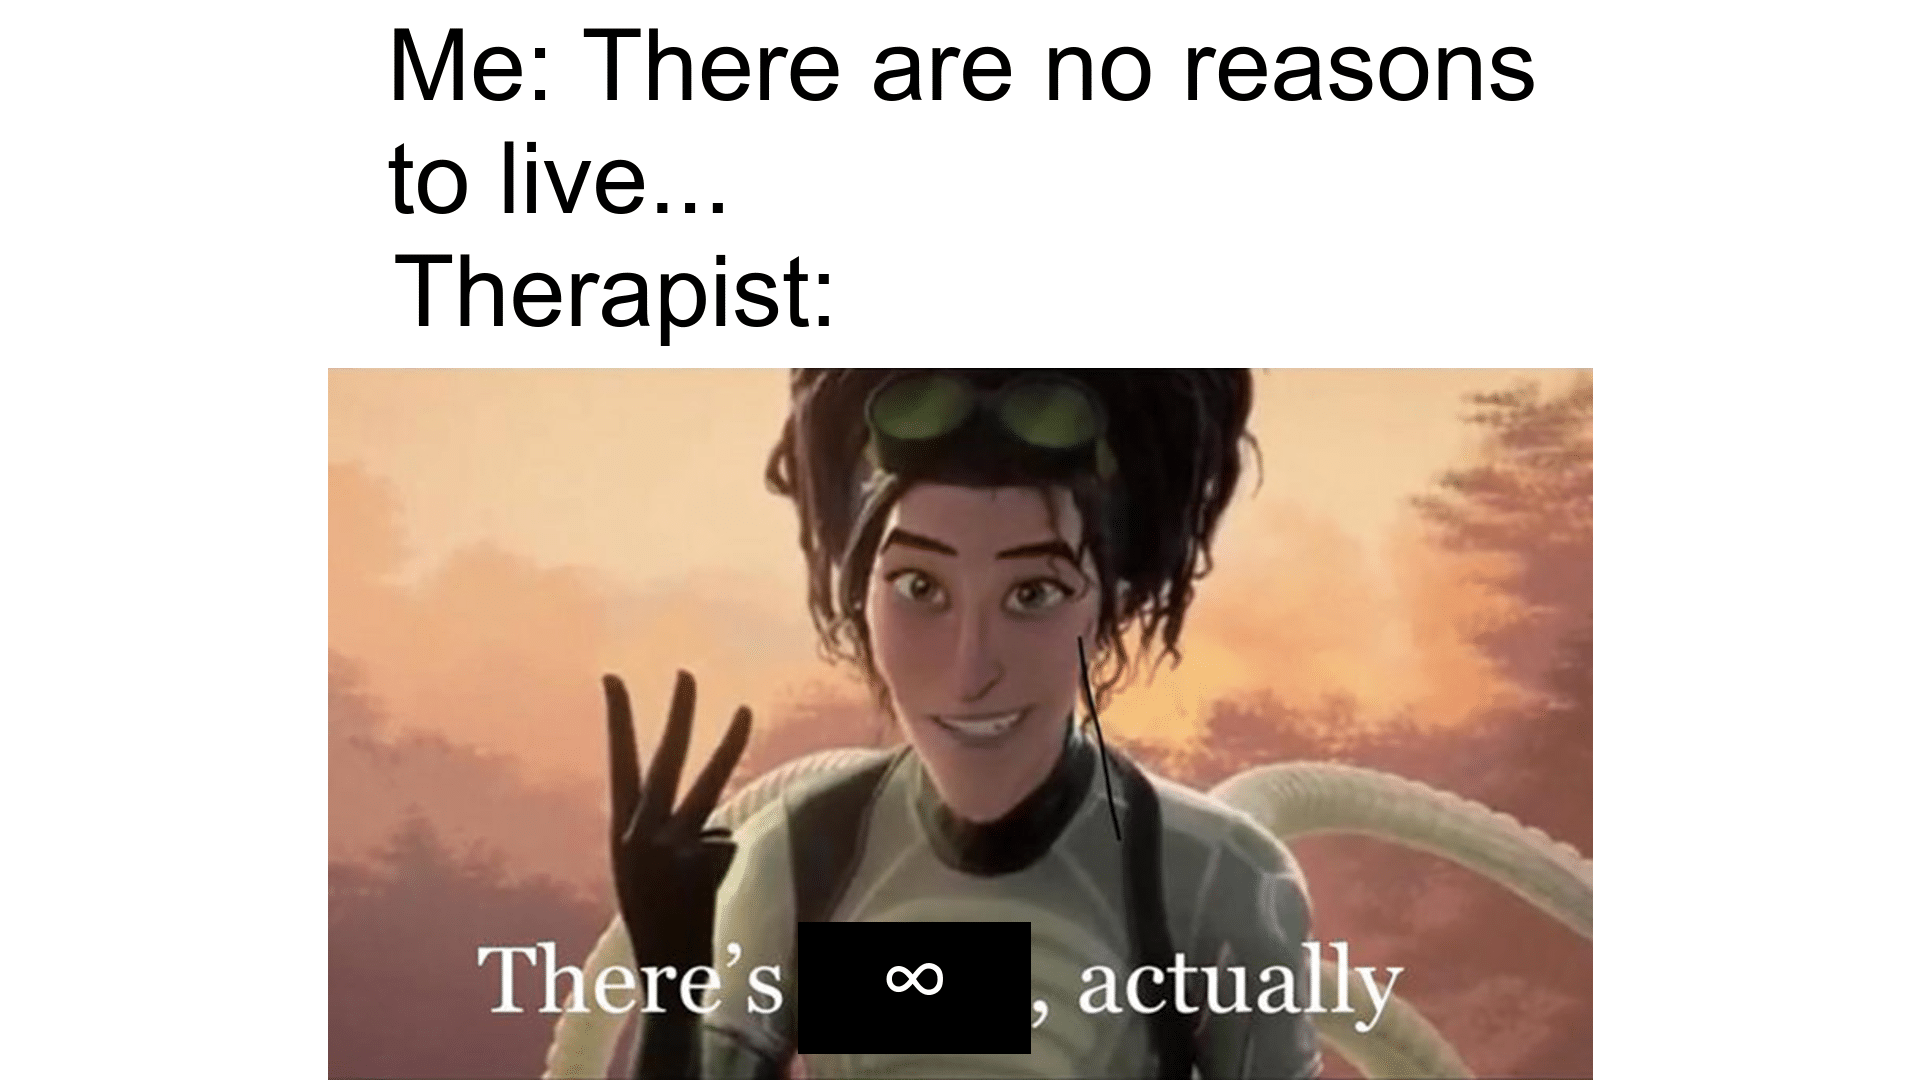 Wholesome memes, Therapy Wholesome Memes Wholesome memes, Therapy text: Me: There are no reasons to live... Therapist: T r 's 00 actually 